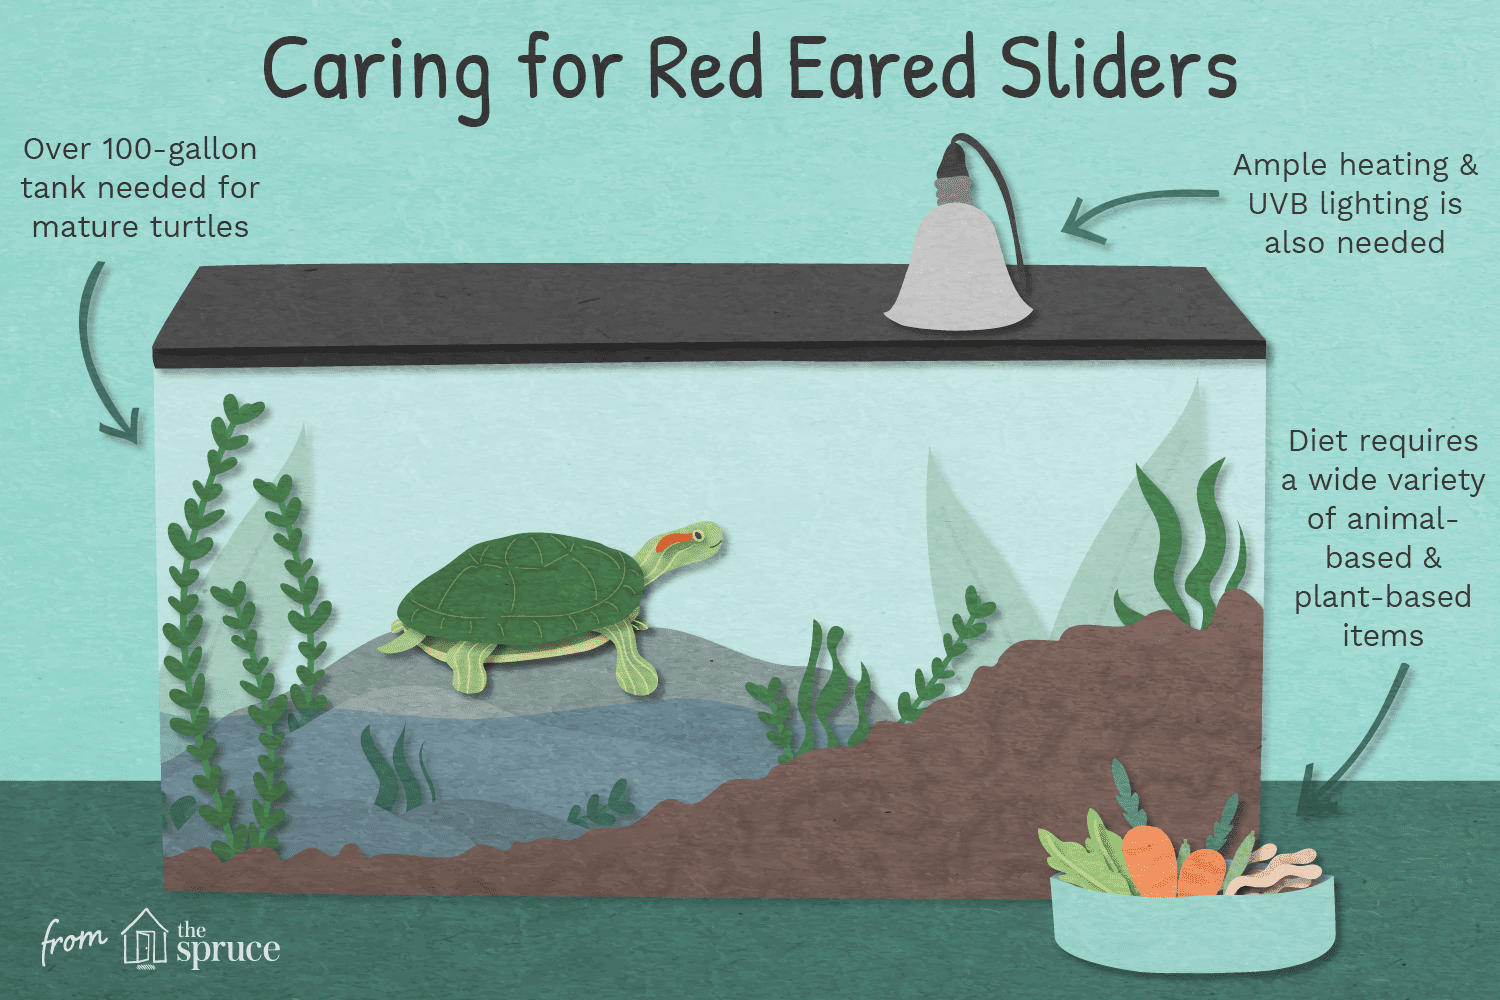 Caring for red eared sliders illustration